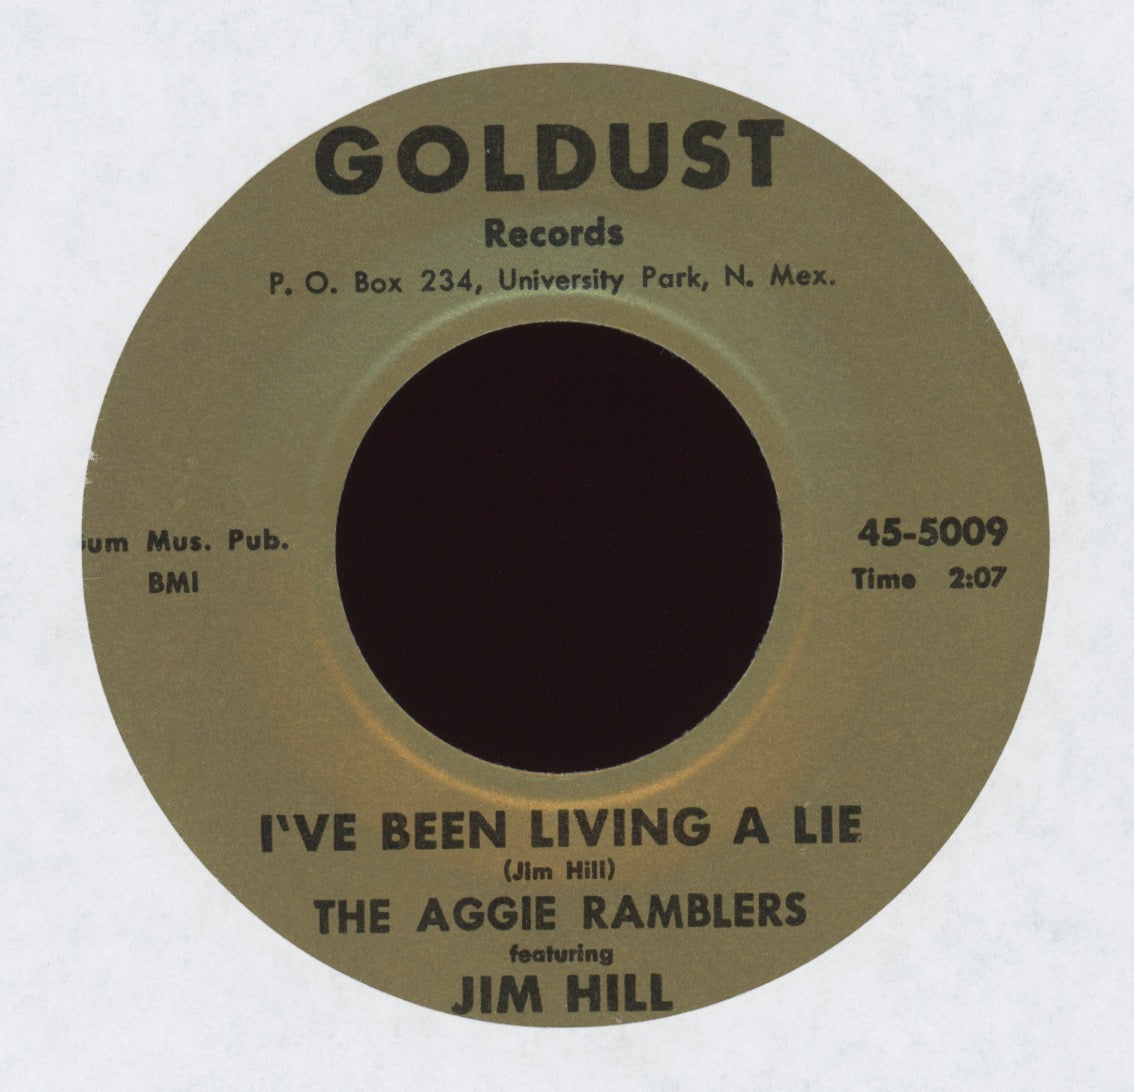 Jim Hill & The Aggie Ramblers - Let's See This Thing Through on Goldust